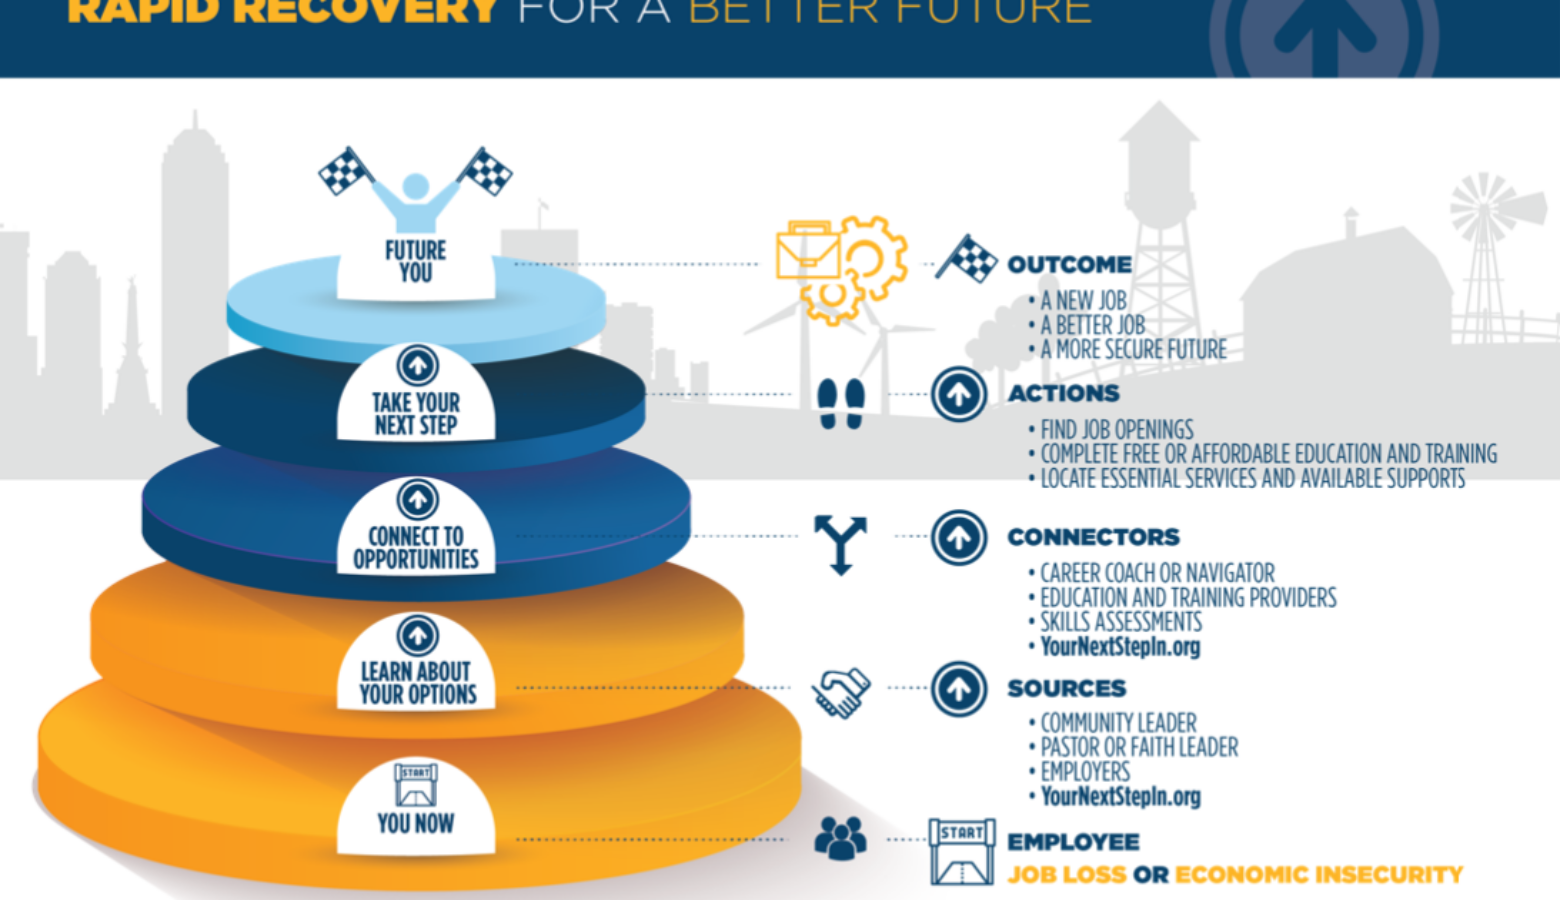 A graphic representing the Rapid Recovery for a Better Future plan created by Indiana workforce agencies. (Courtesy of Governor's Workforce Cabinet)